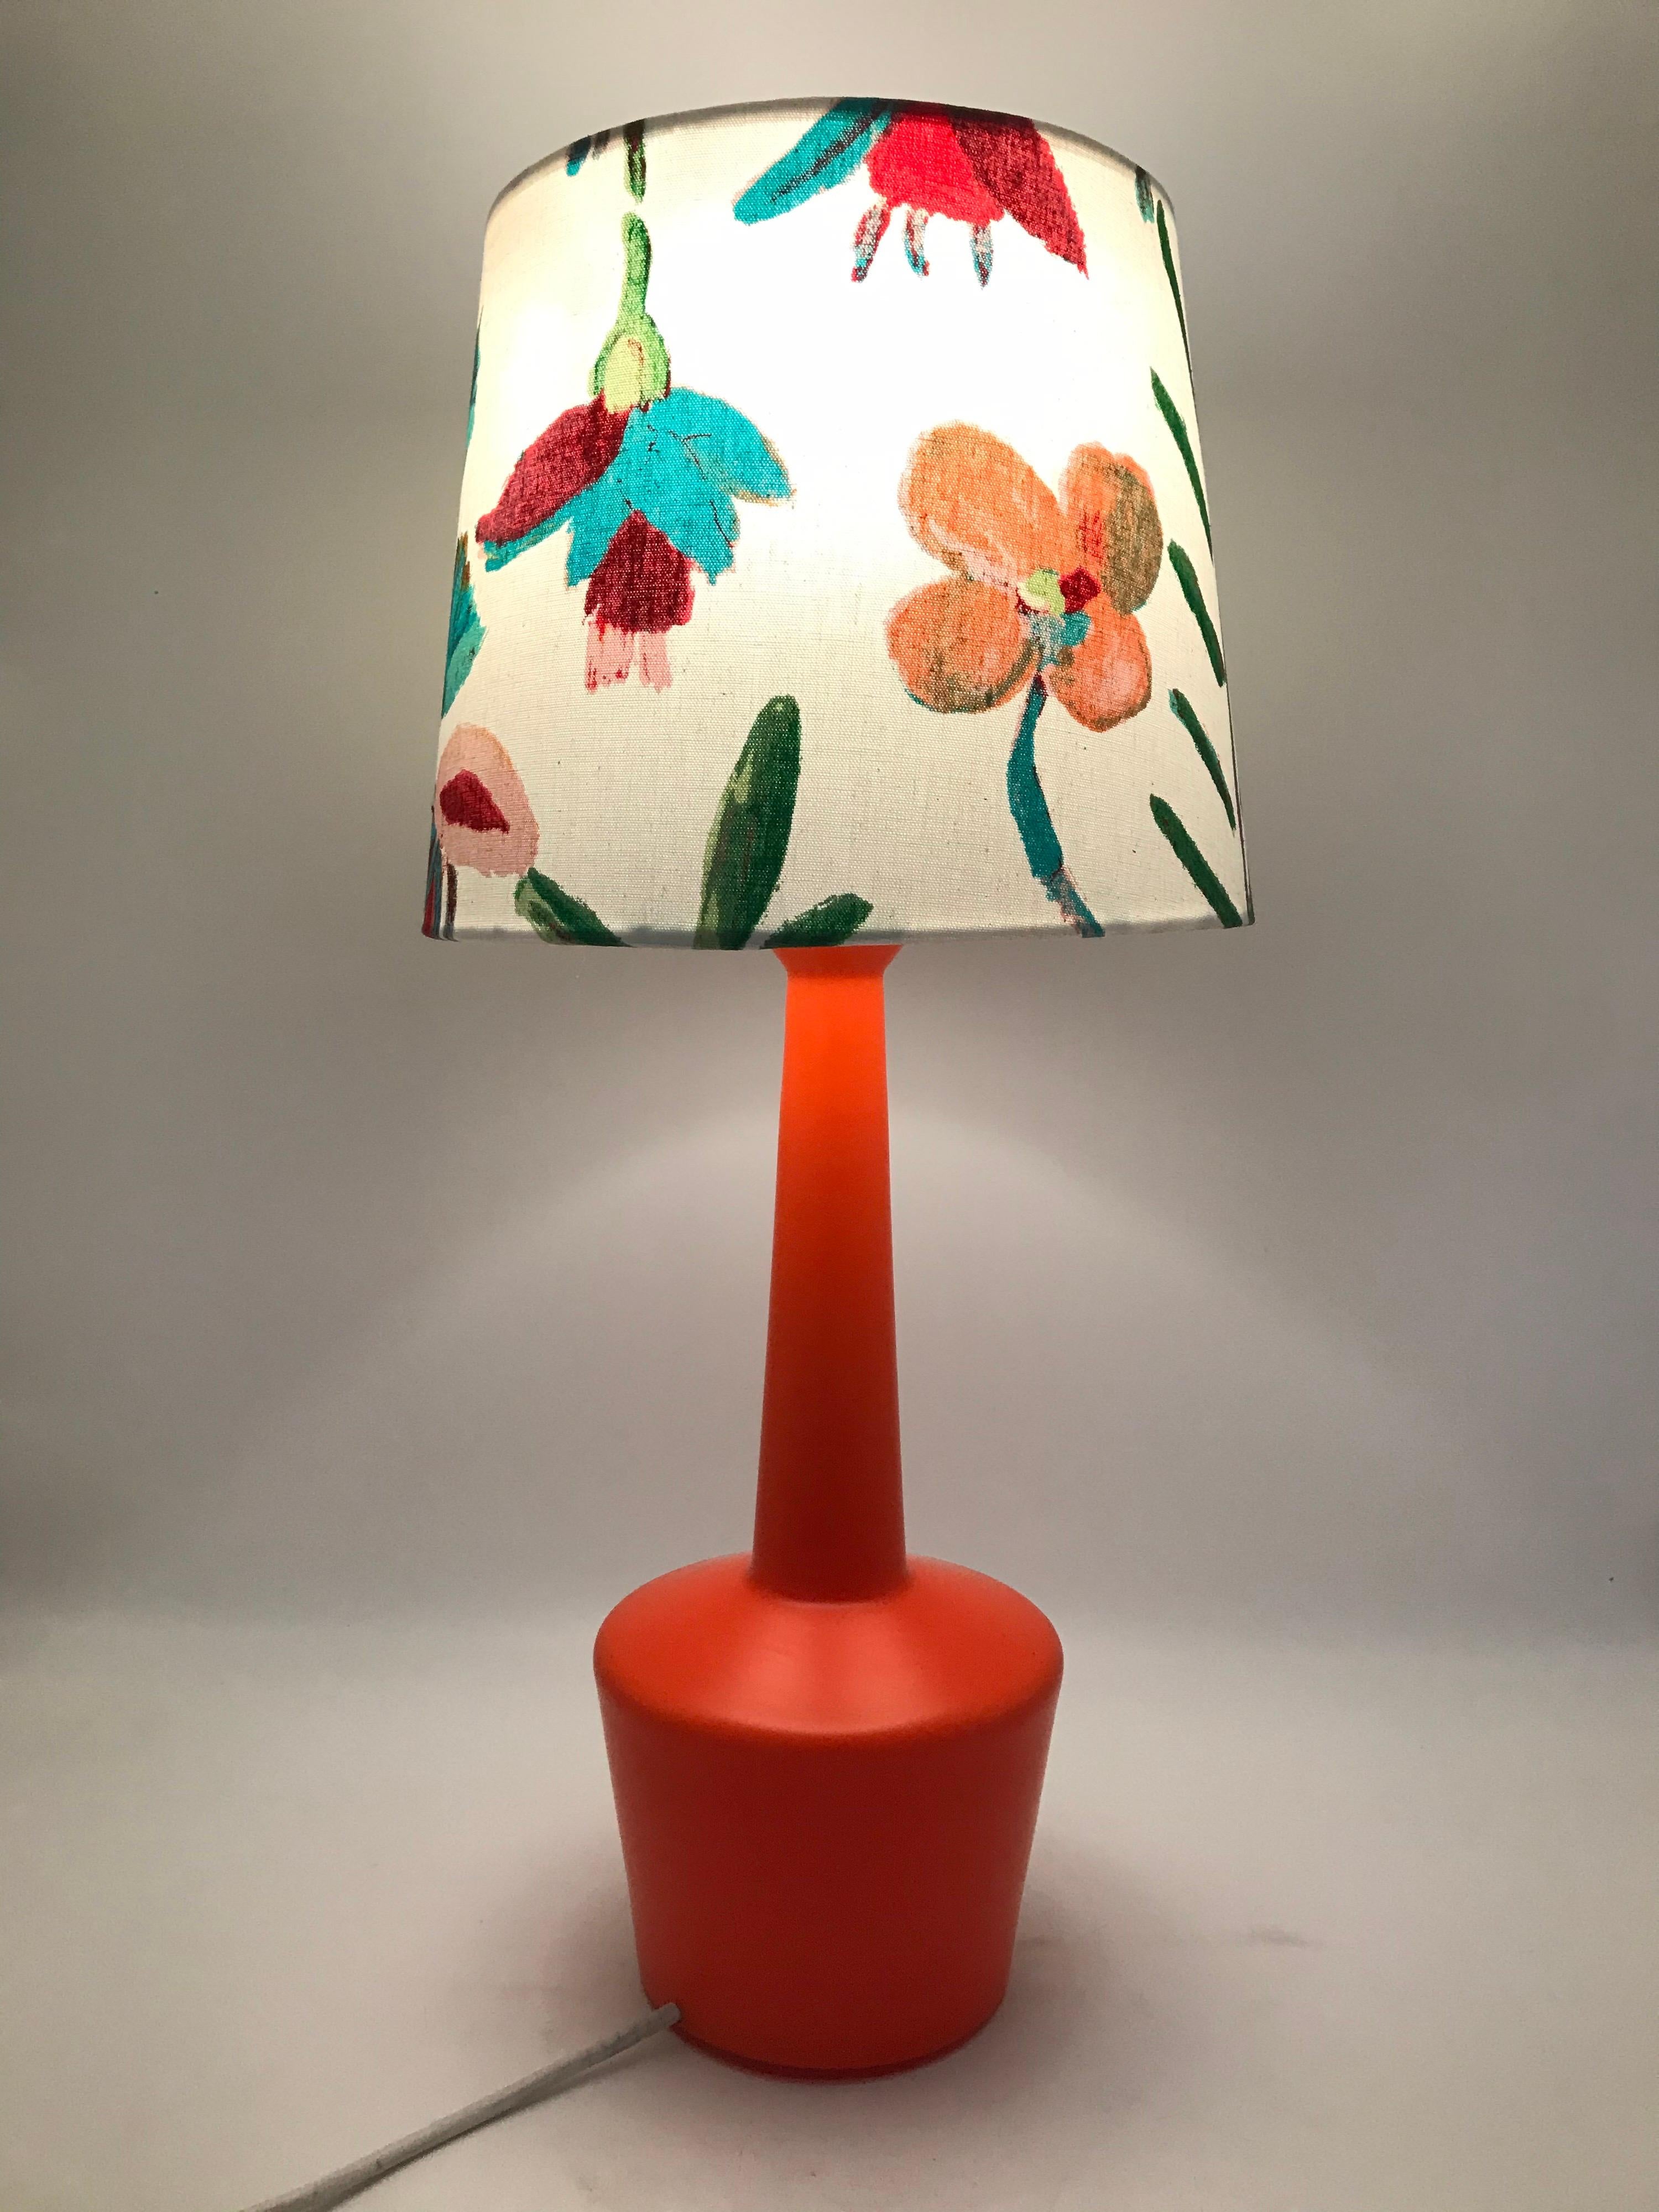 Vintage Danish table lamp by Kastrup Glass Works from the 1960s
The glass lamp with its stunning orange color together with the floral design on the white shade look very stylish together even though they were made 50 years apart.
Lampshade not